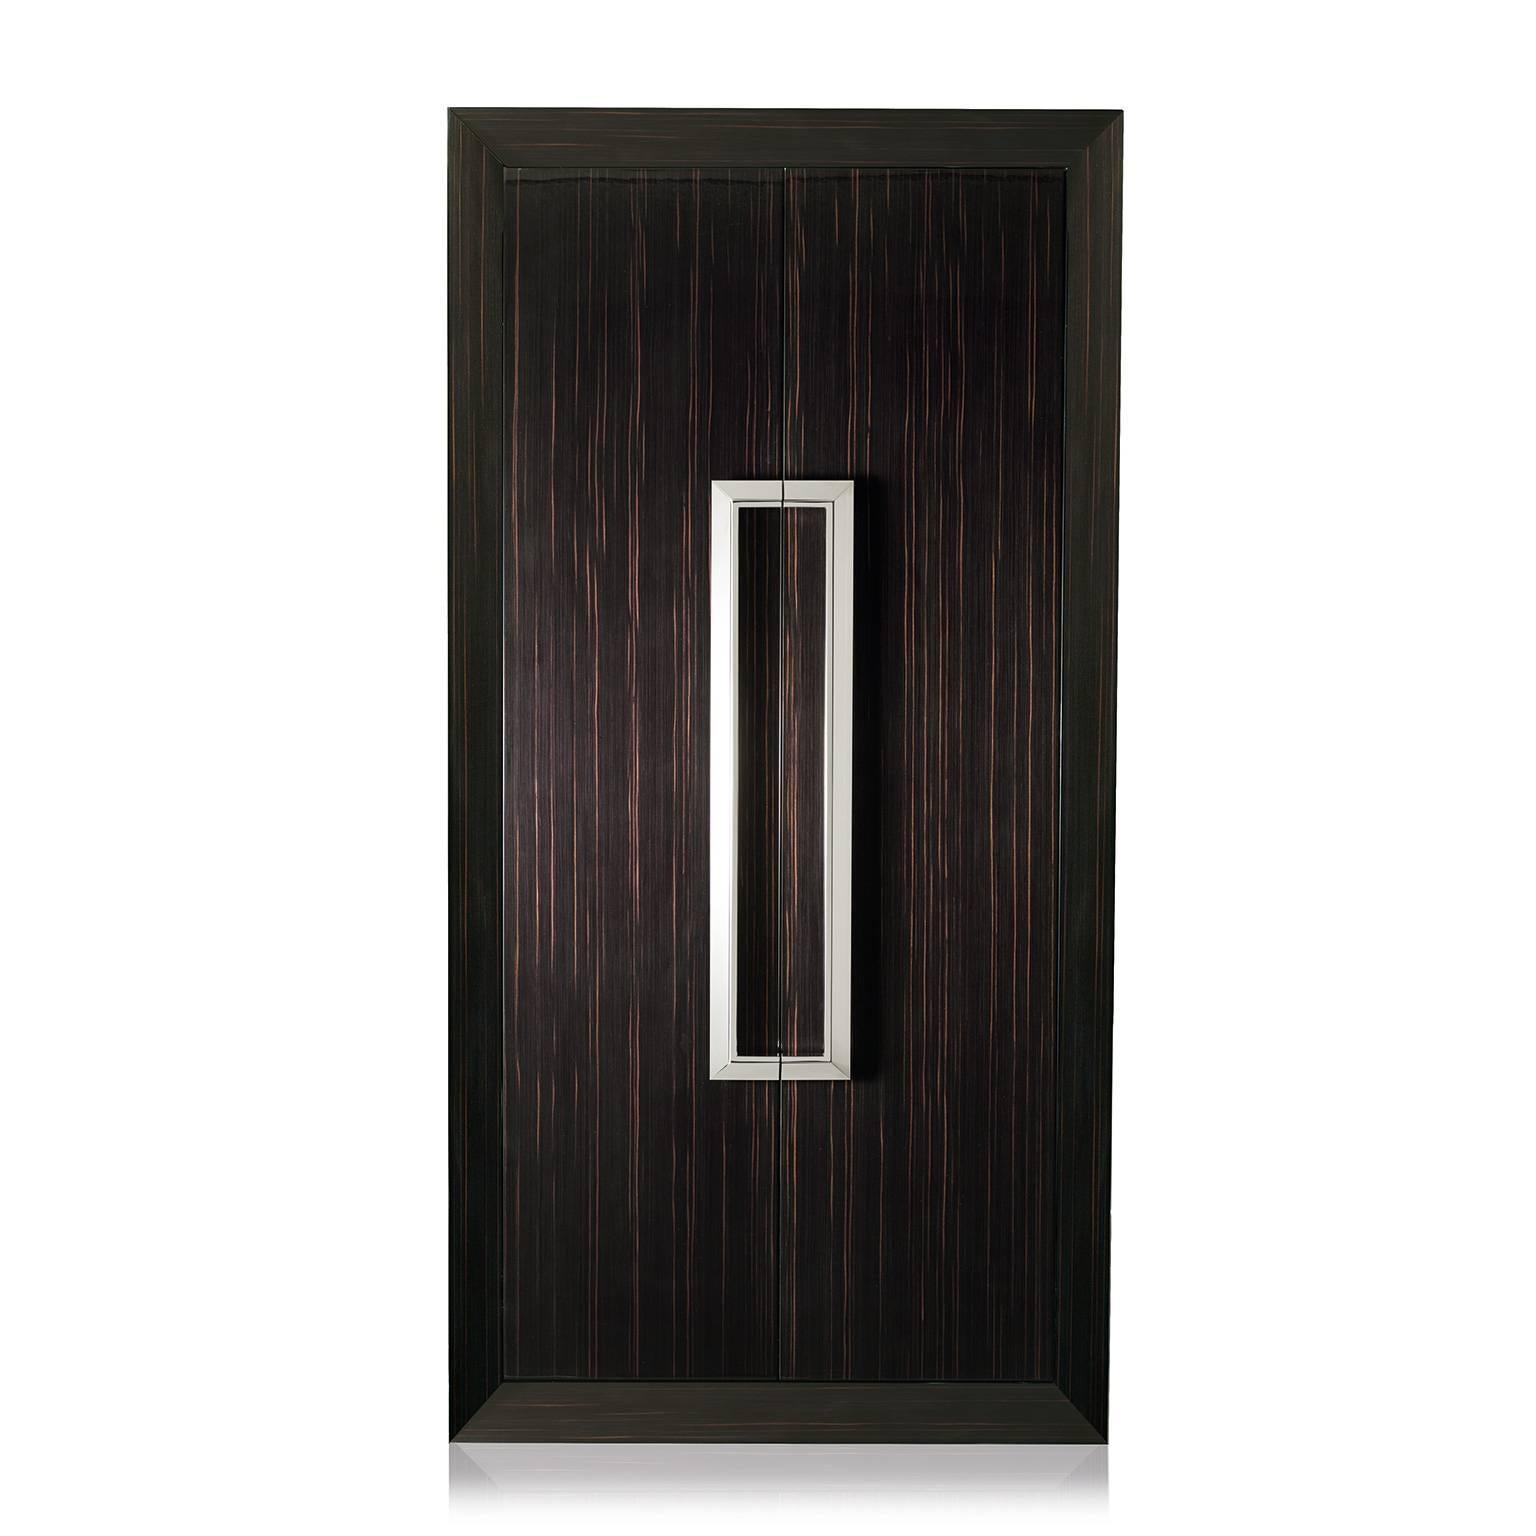 Tempo Assoluto is contemporary and luxurious armoire safe in polished ebony with safe, anchorable to the wall. 
Biometric opening device and emergency key system. Watch winders entirely made in Switzerland. Secret compartment, inside lined in